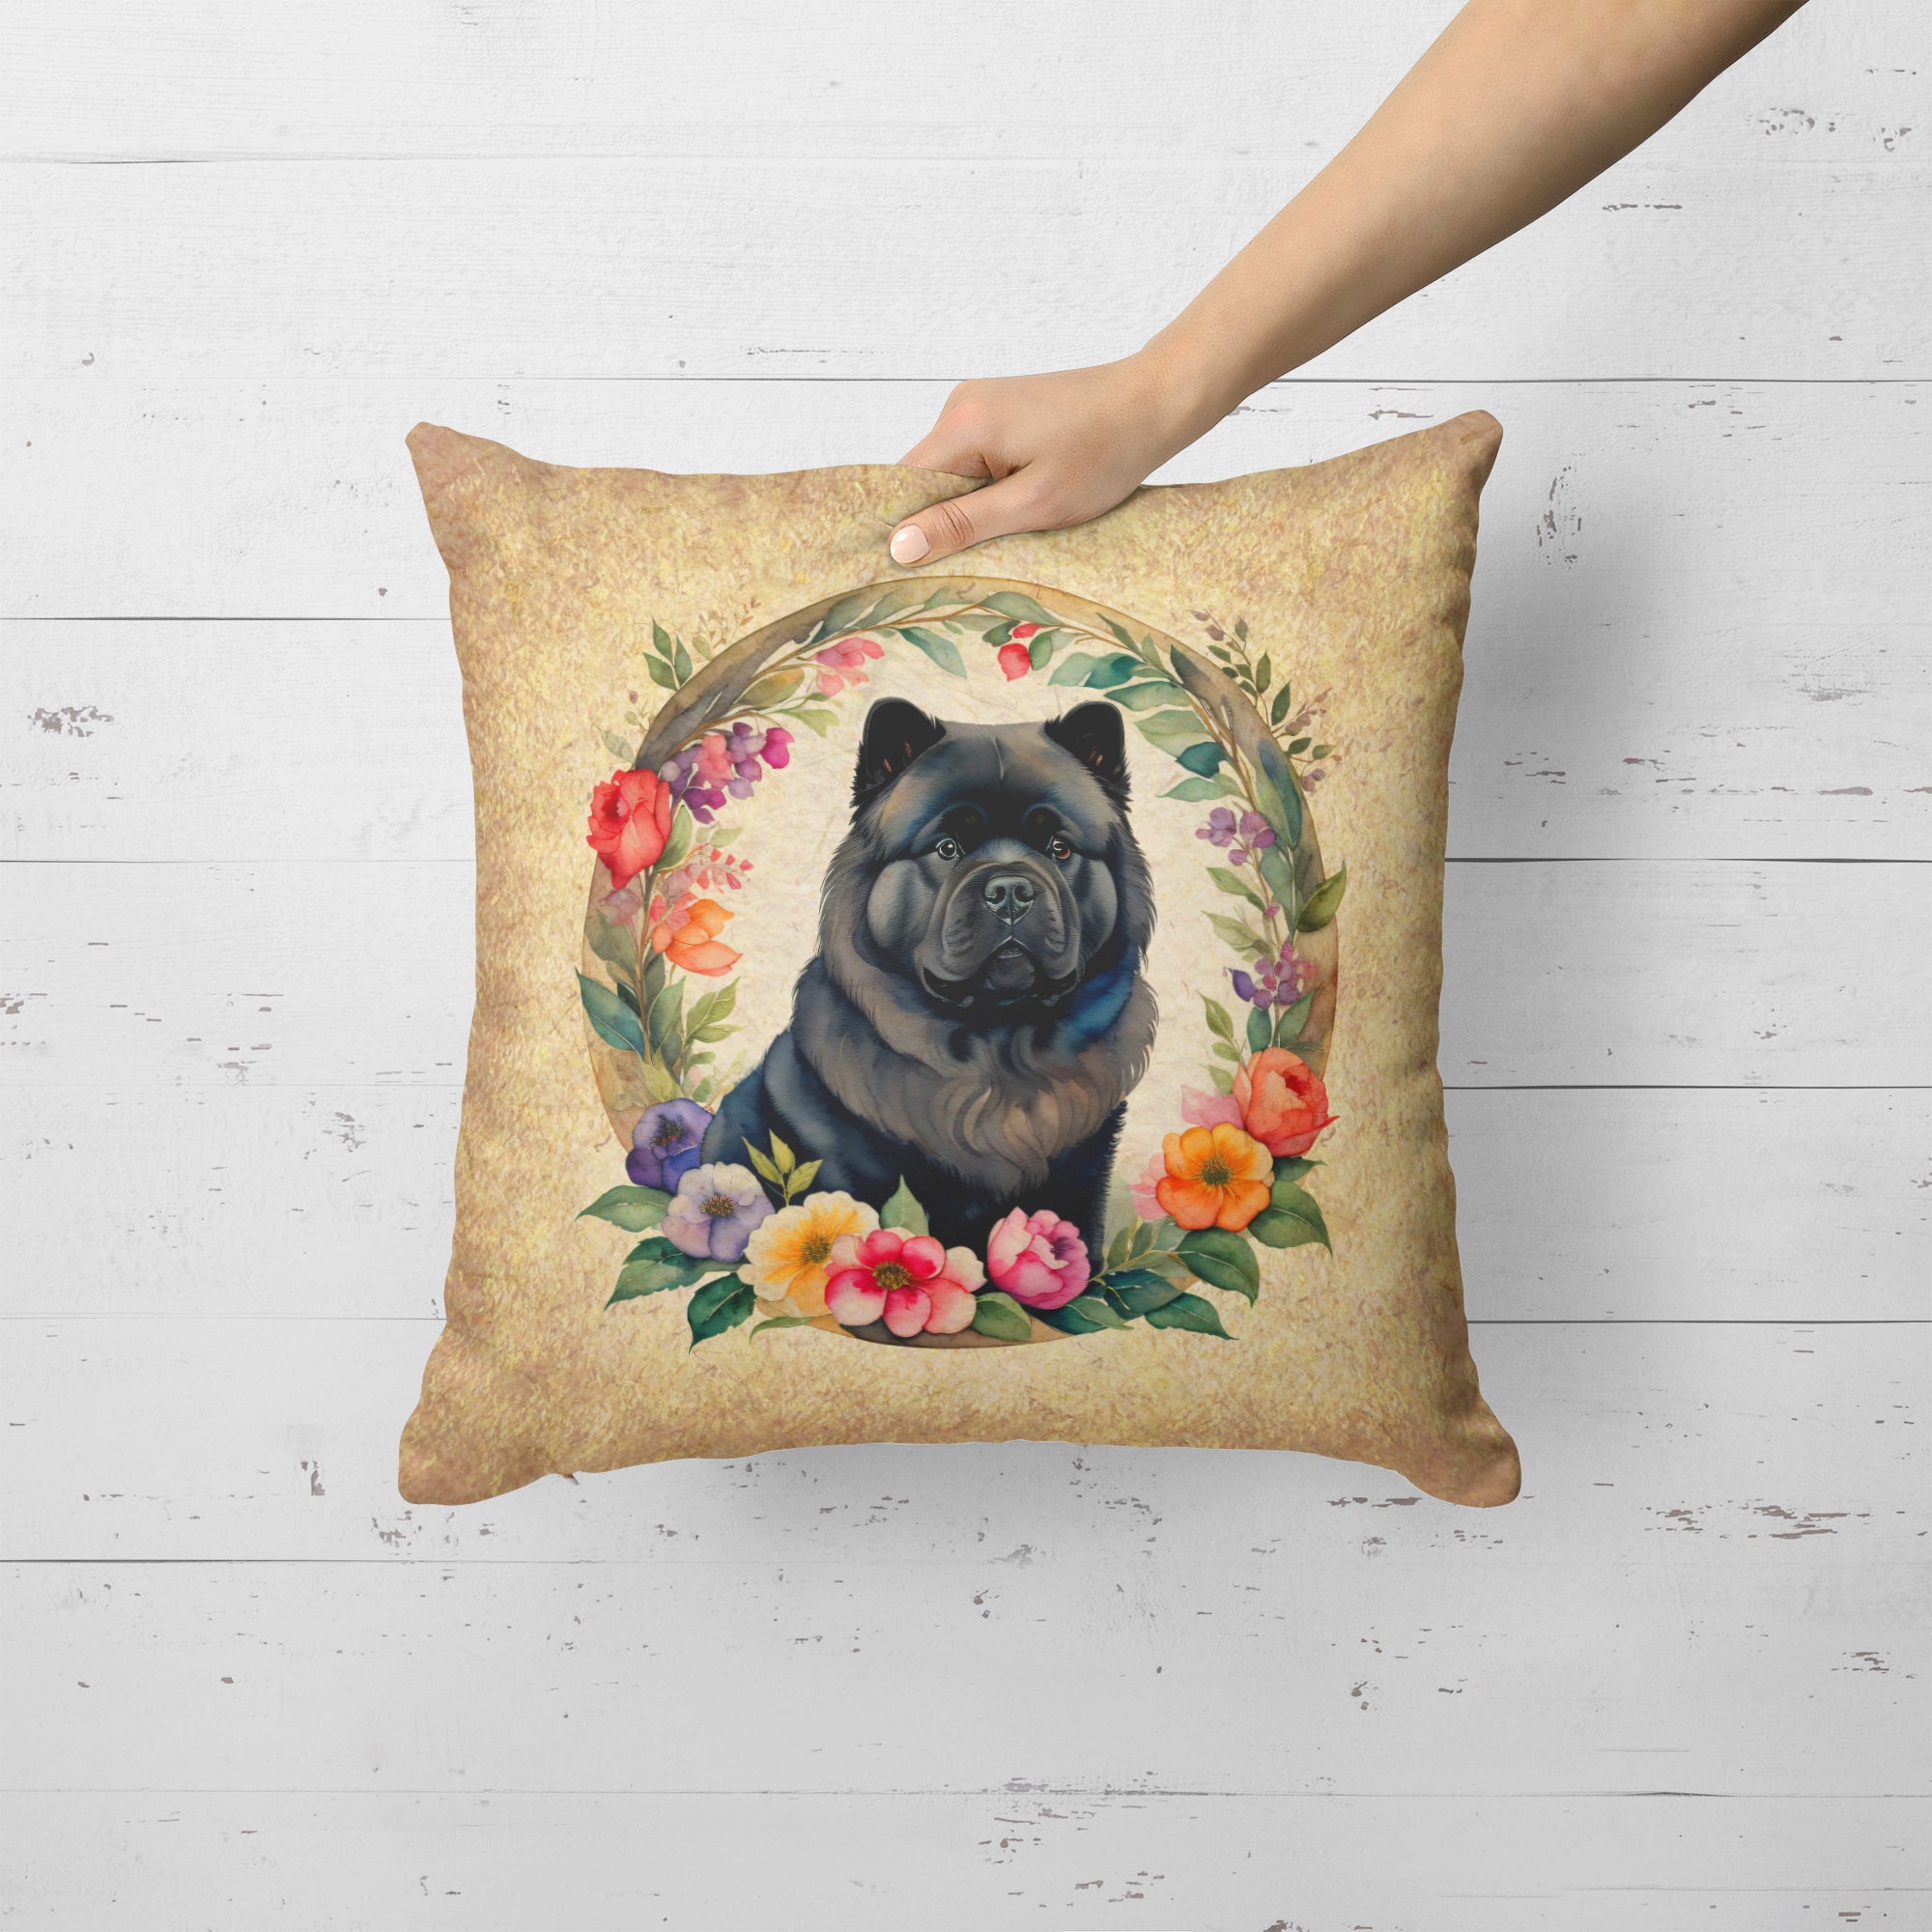 Buy this Black Chow Chow and Flowers Fabric Decorative Pillow